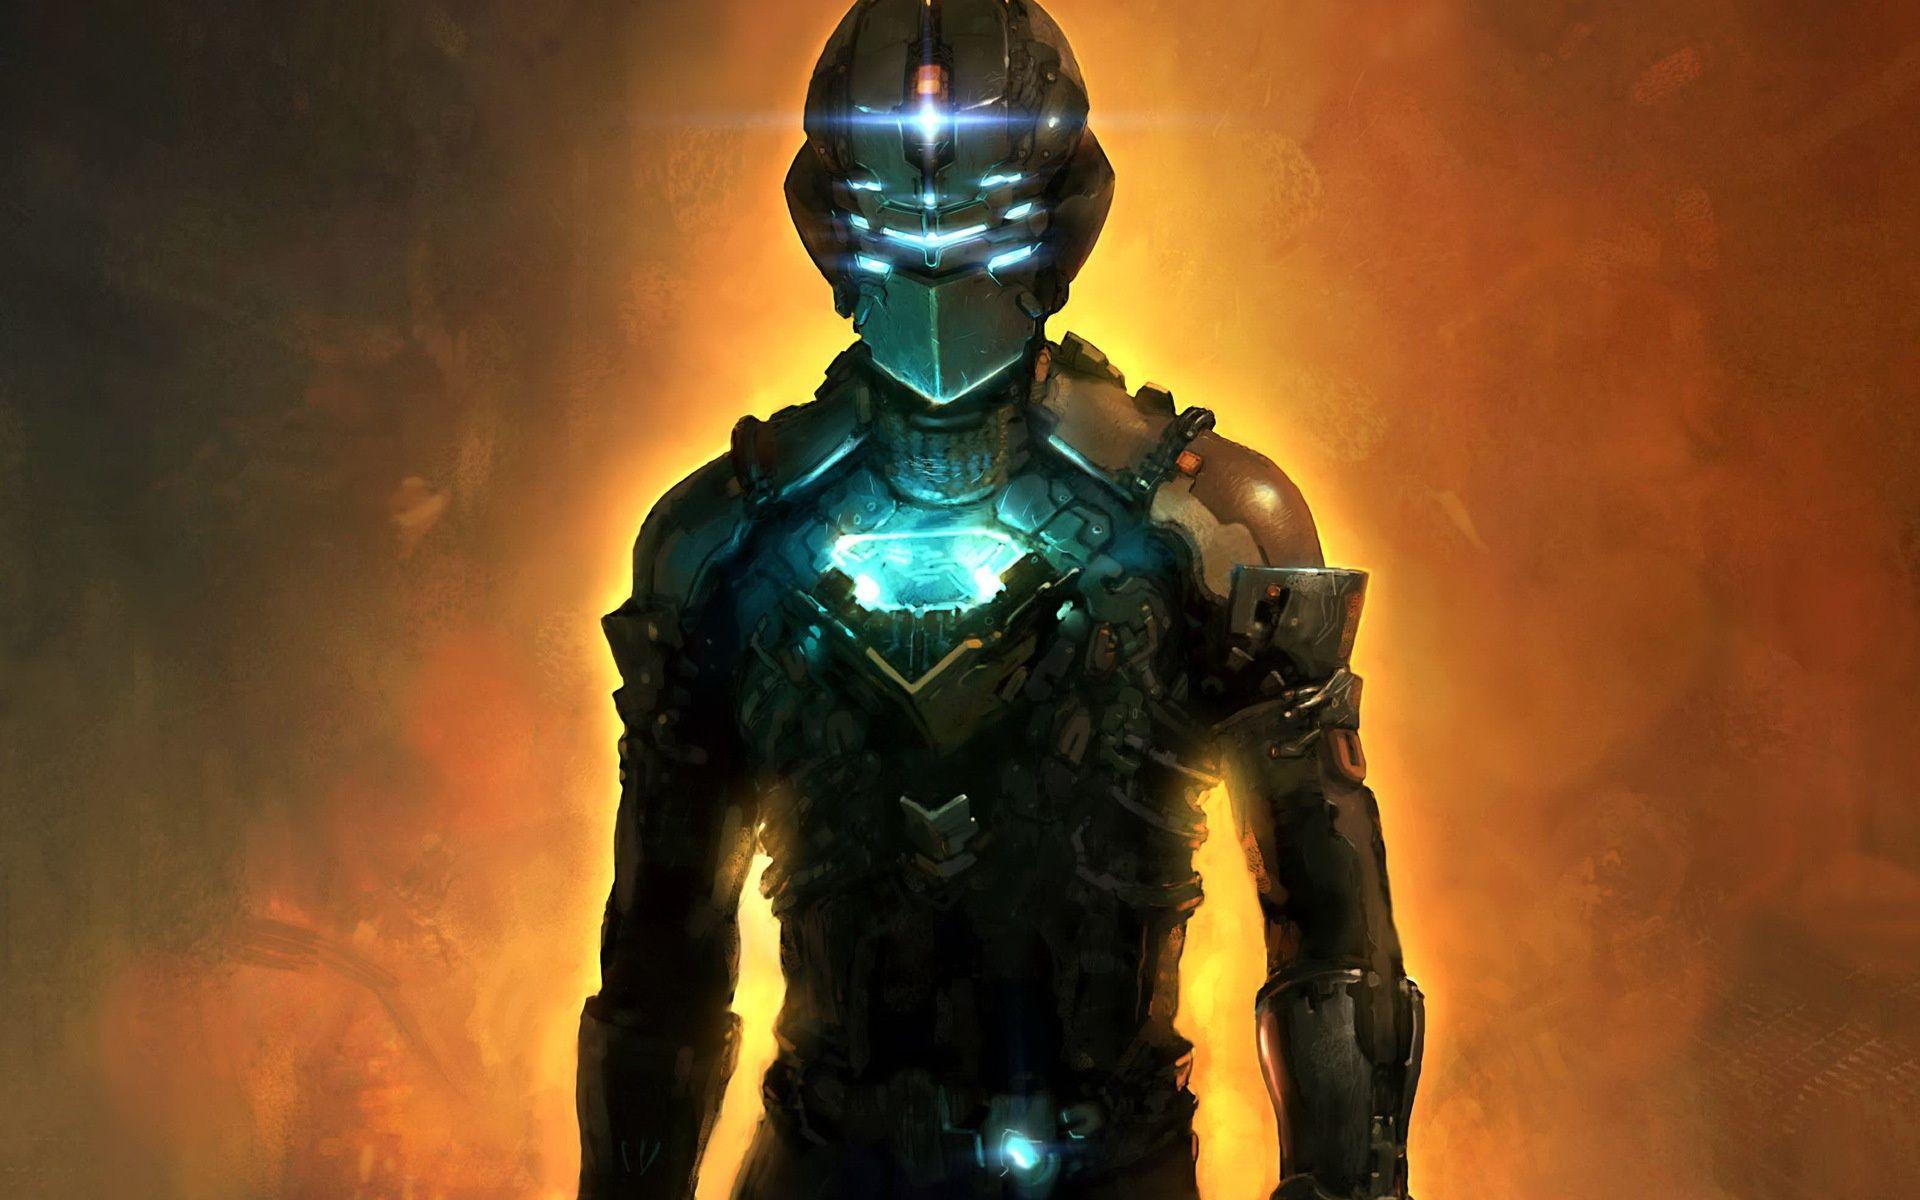 download free dead space 2 pc